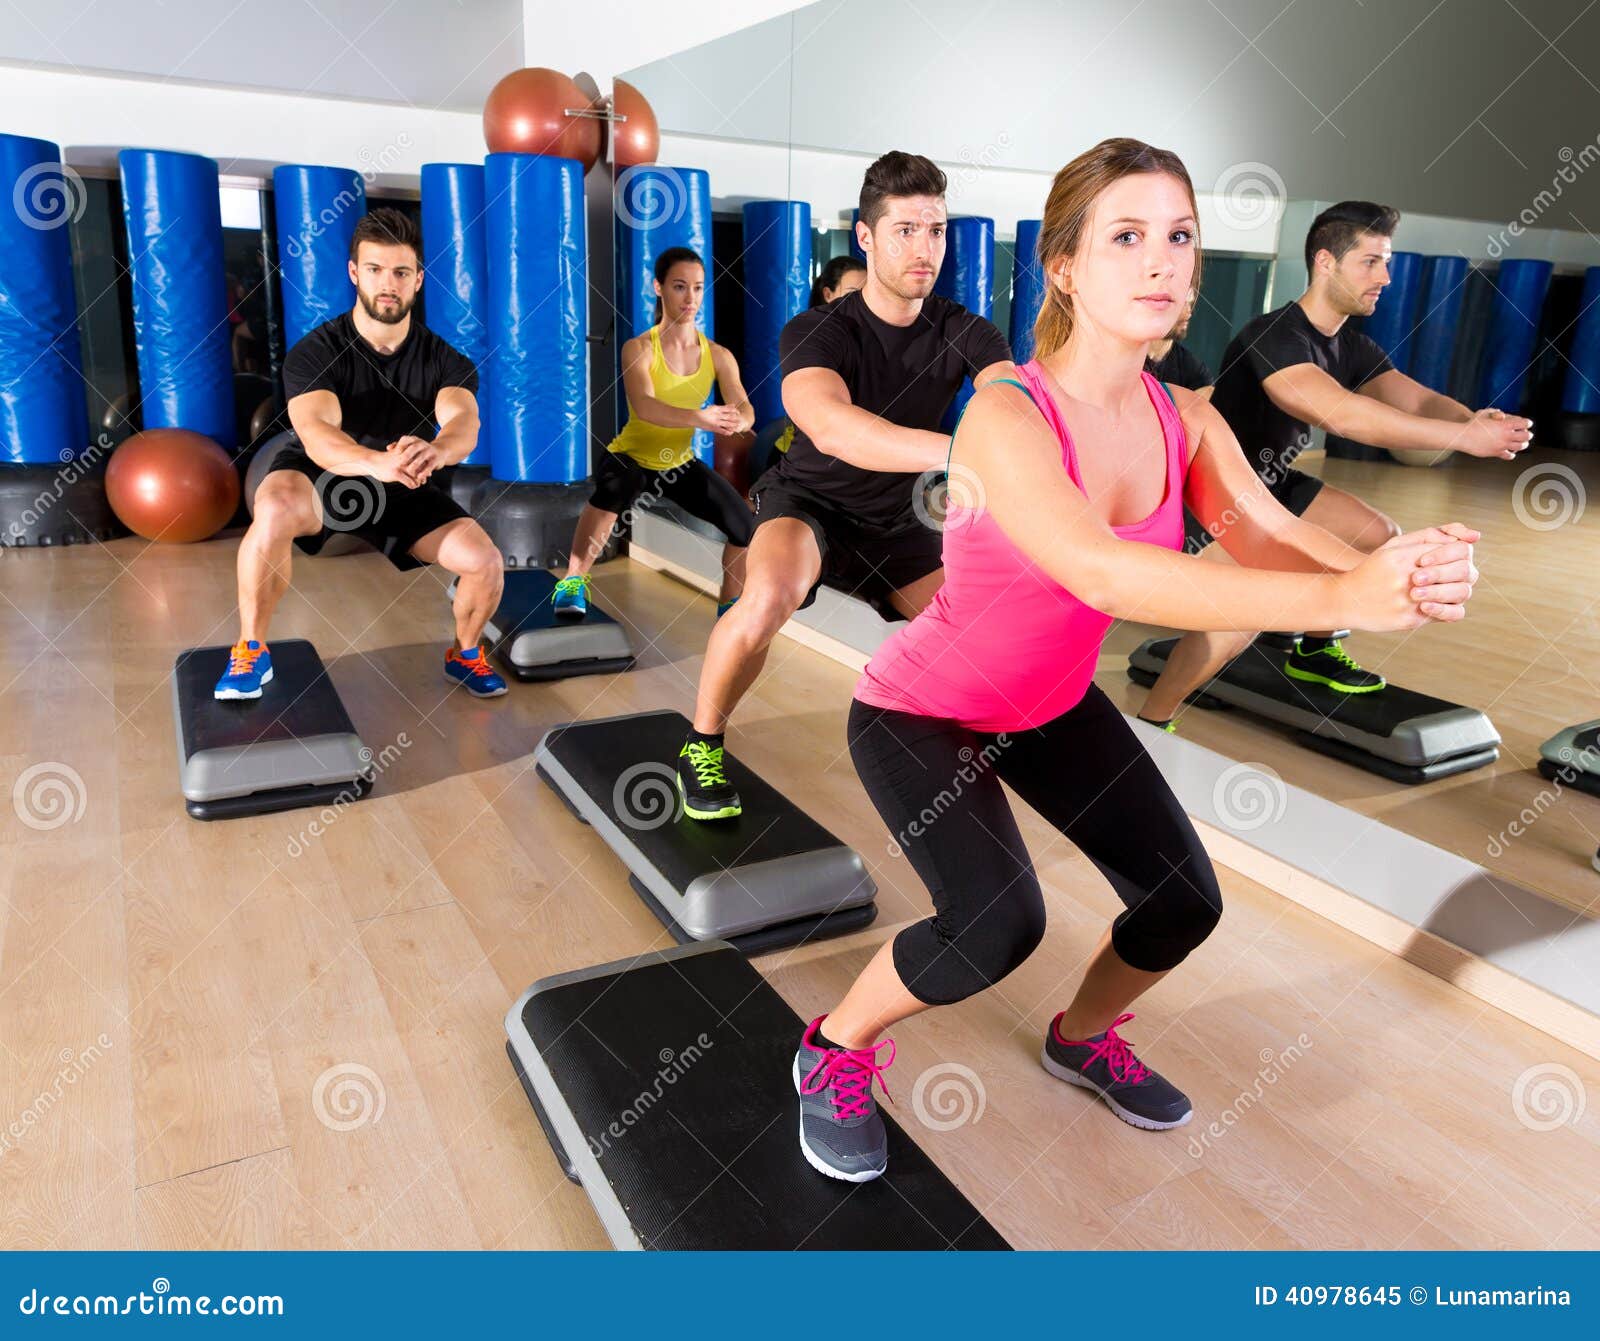 Cardio Step Dance Squat Group At Fitness Gym Stock Image  Image of beauty, lifestyle: 40978645